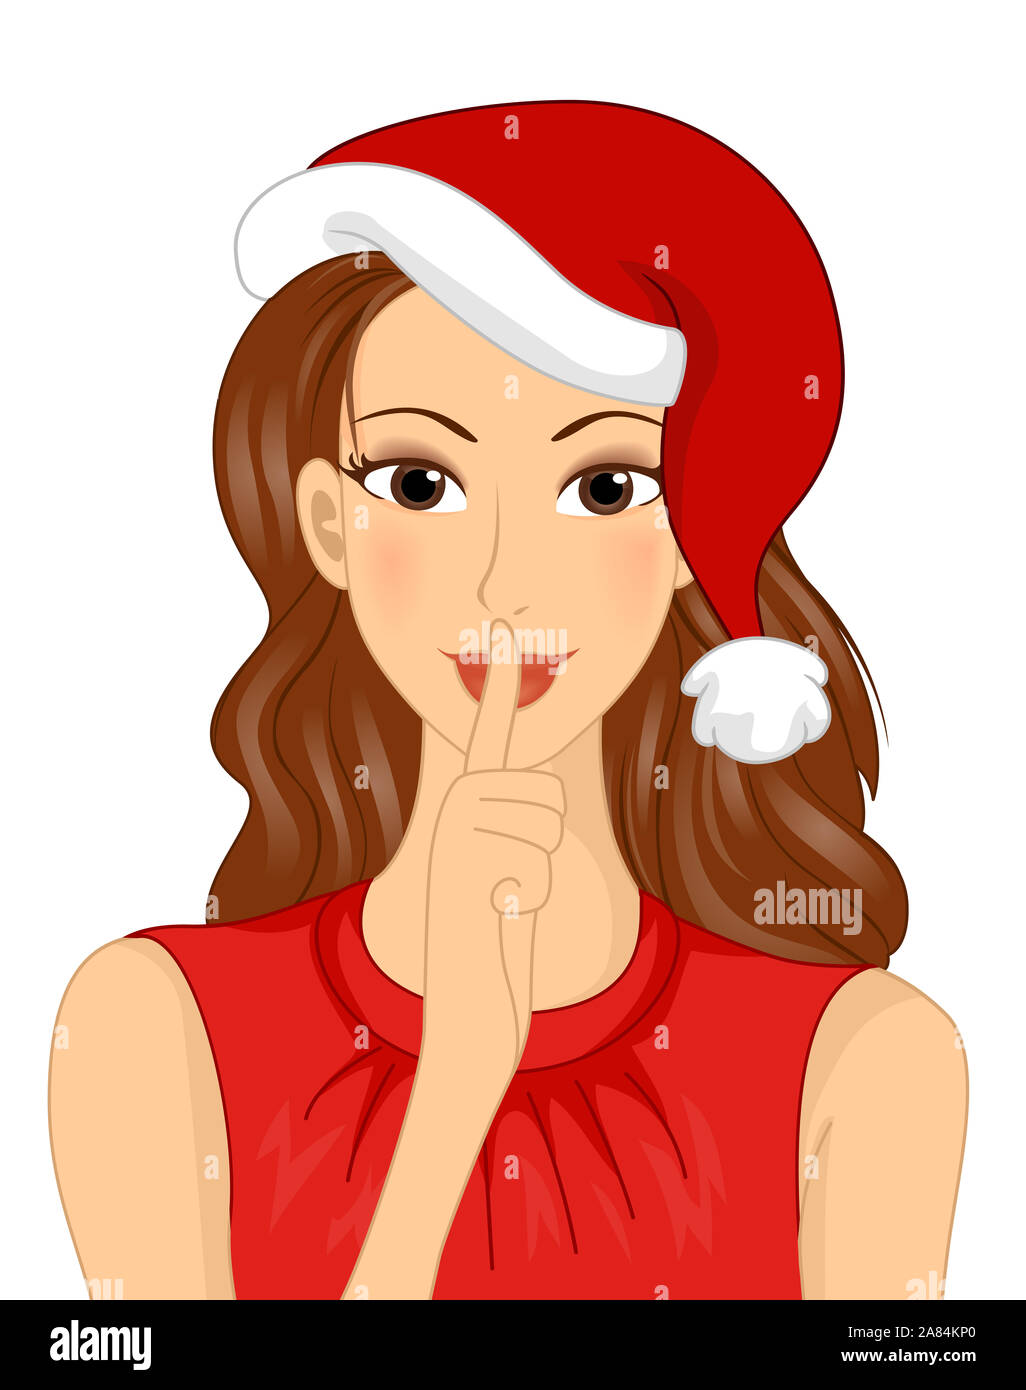 Illustration of a Girl Wearing Santa Claus Hat and Gesturing Quiet or Secret Stock Photo